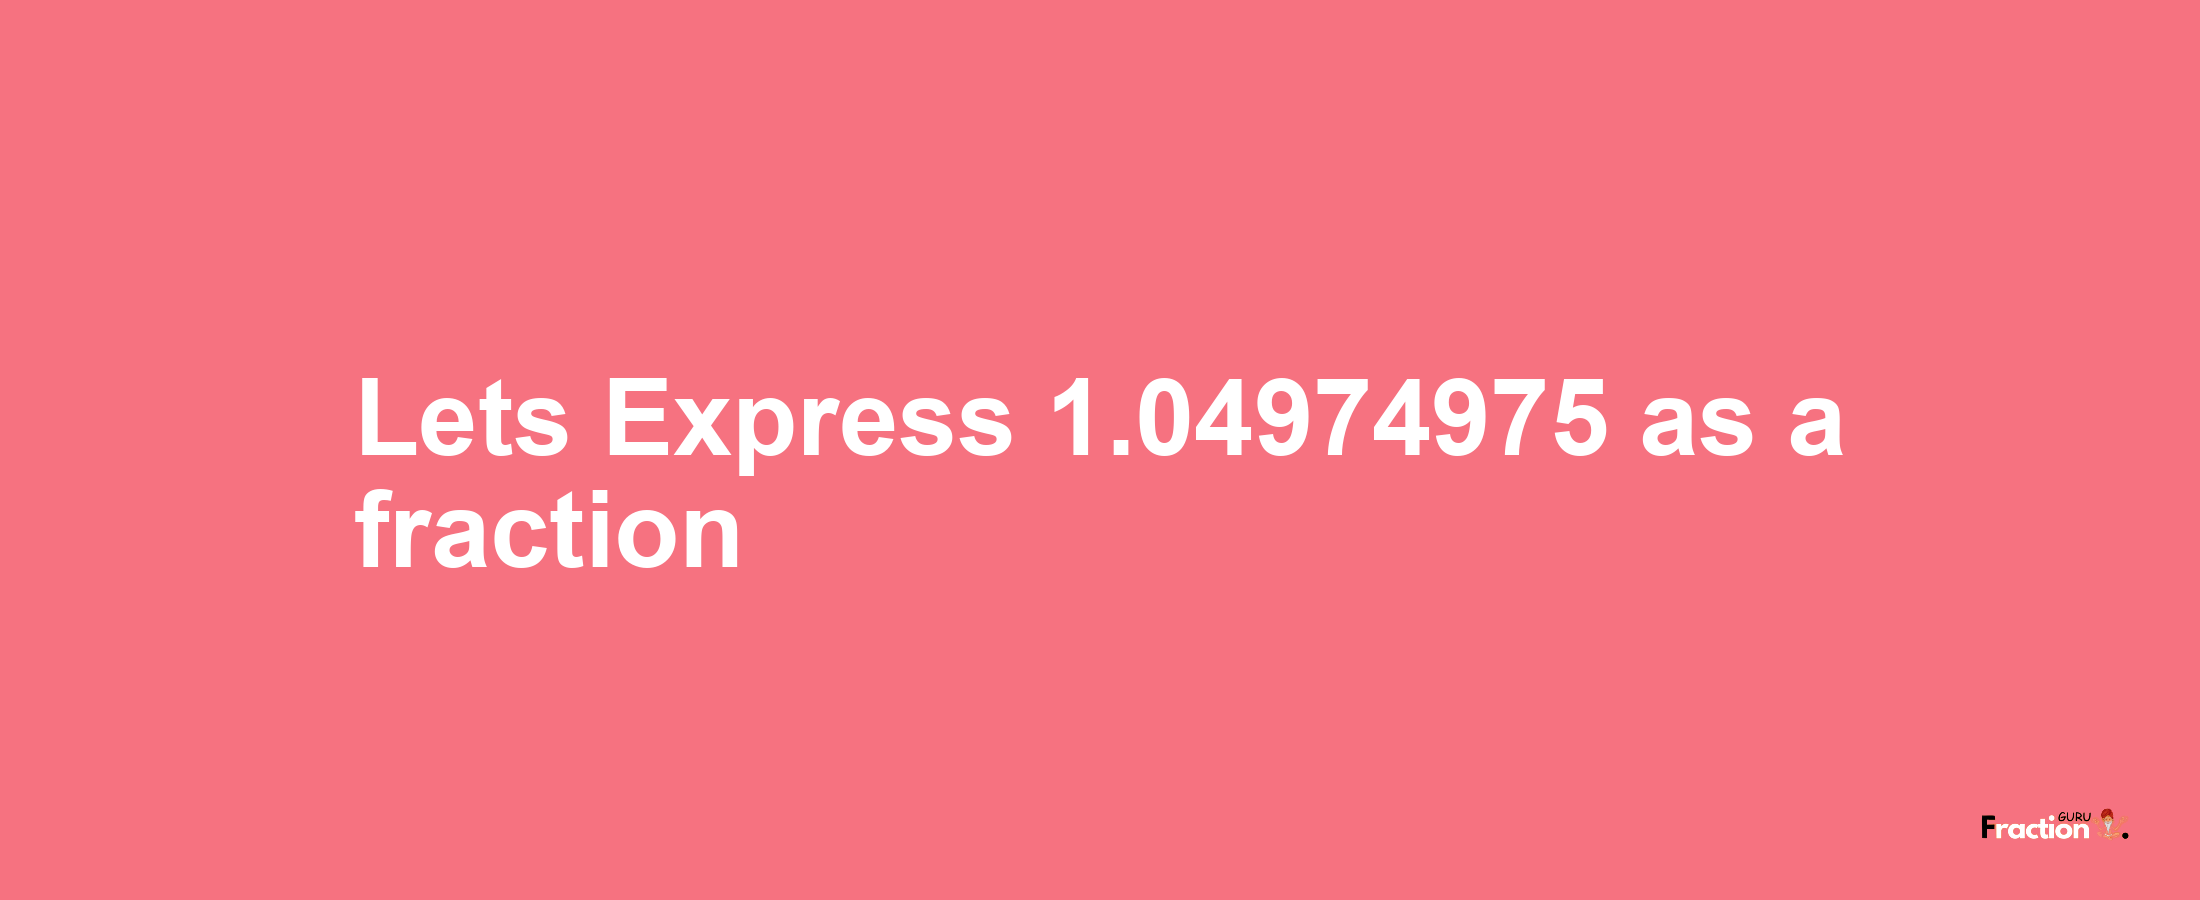 Lets Express 1.04974975 as afraction